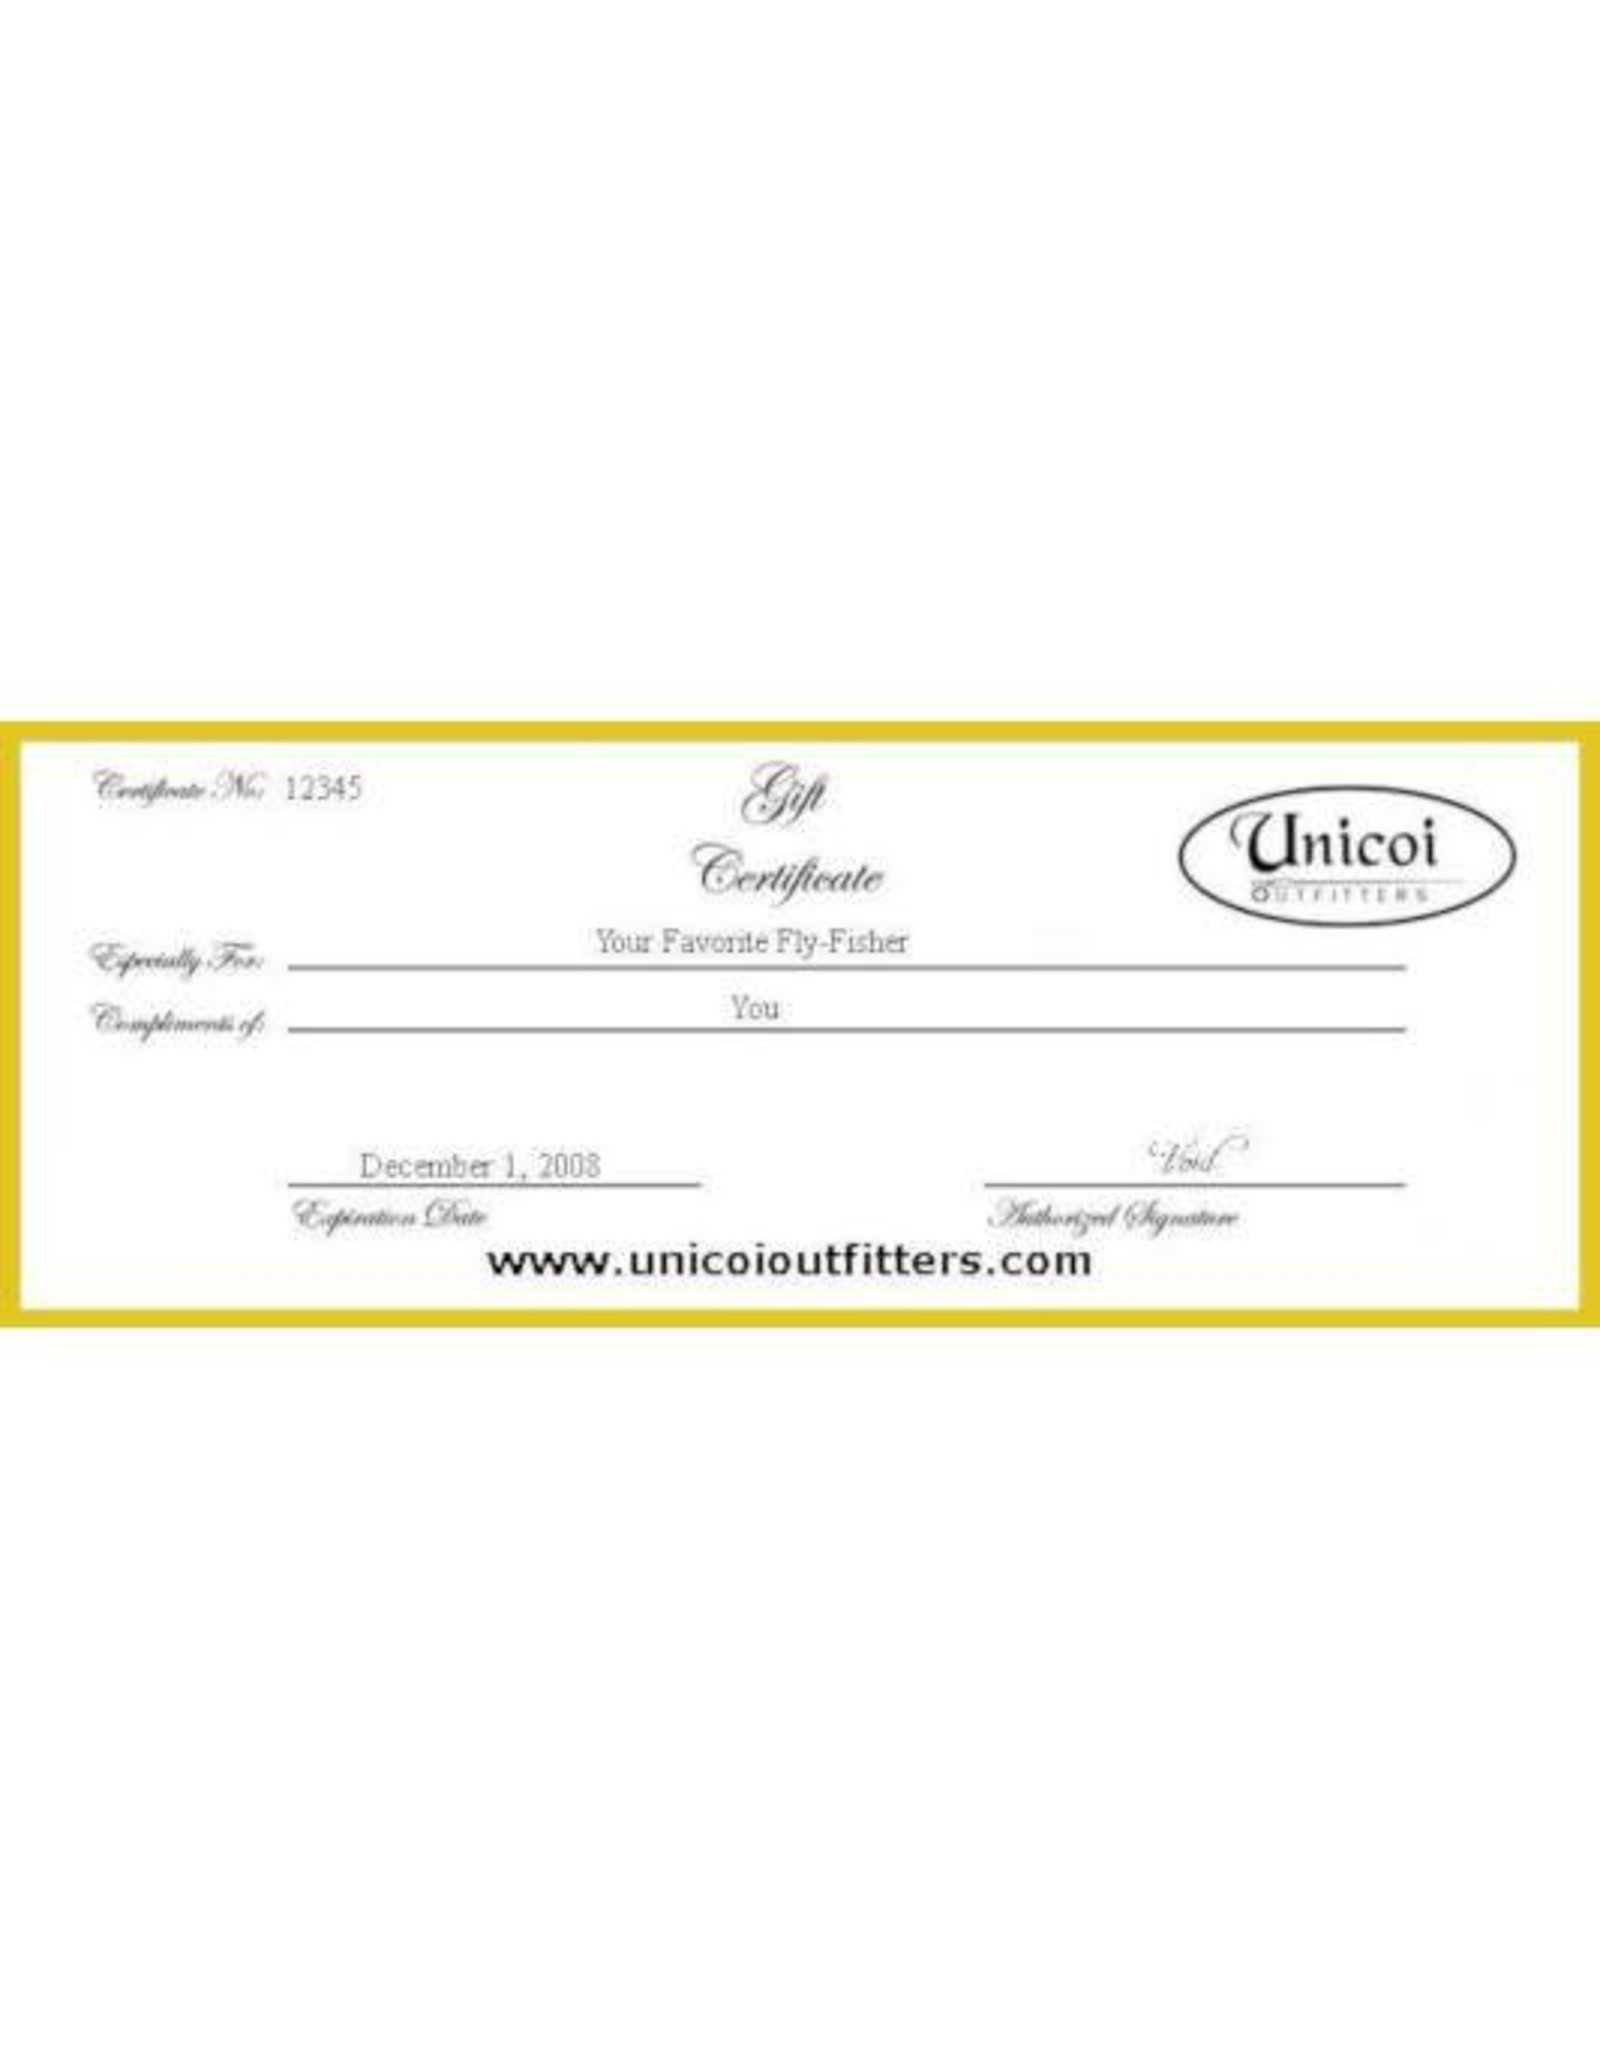 Unicoi Outfitters Gift Certificate -  Unguided Nacoochee Bend Trophy Trout Fishing